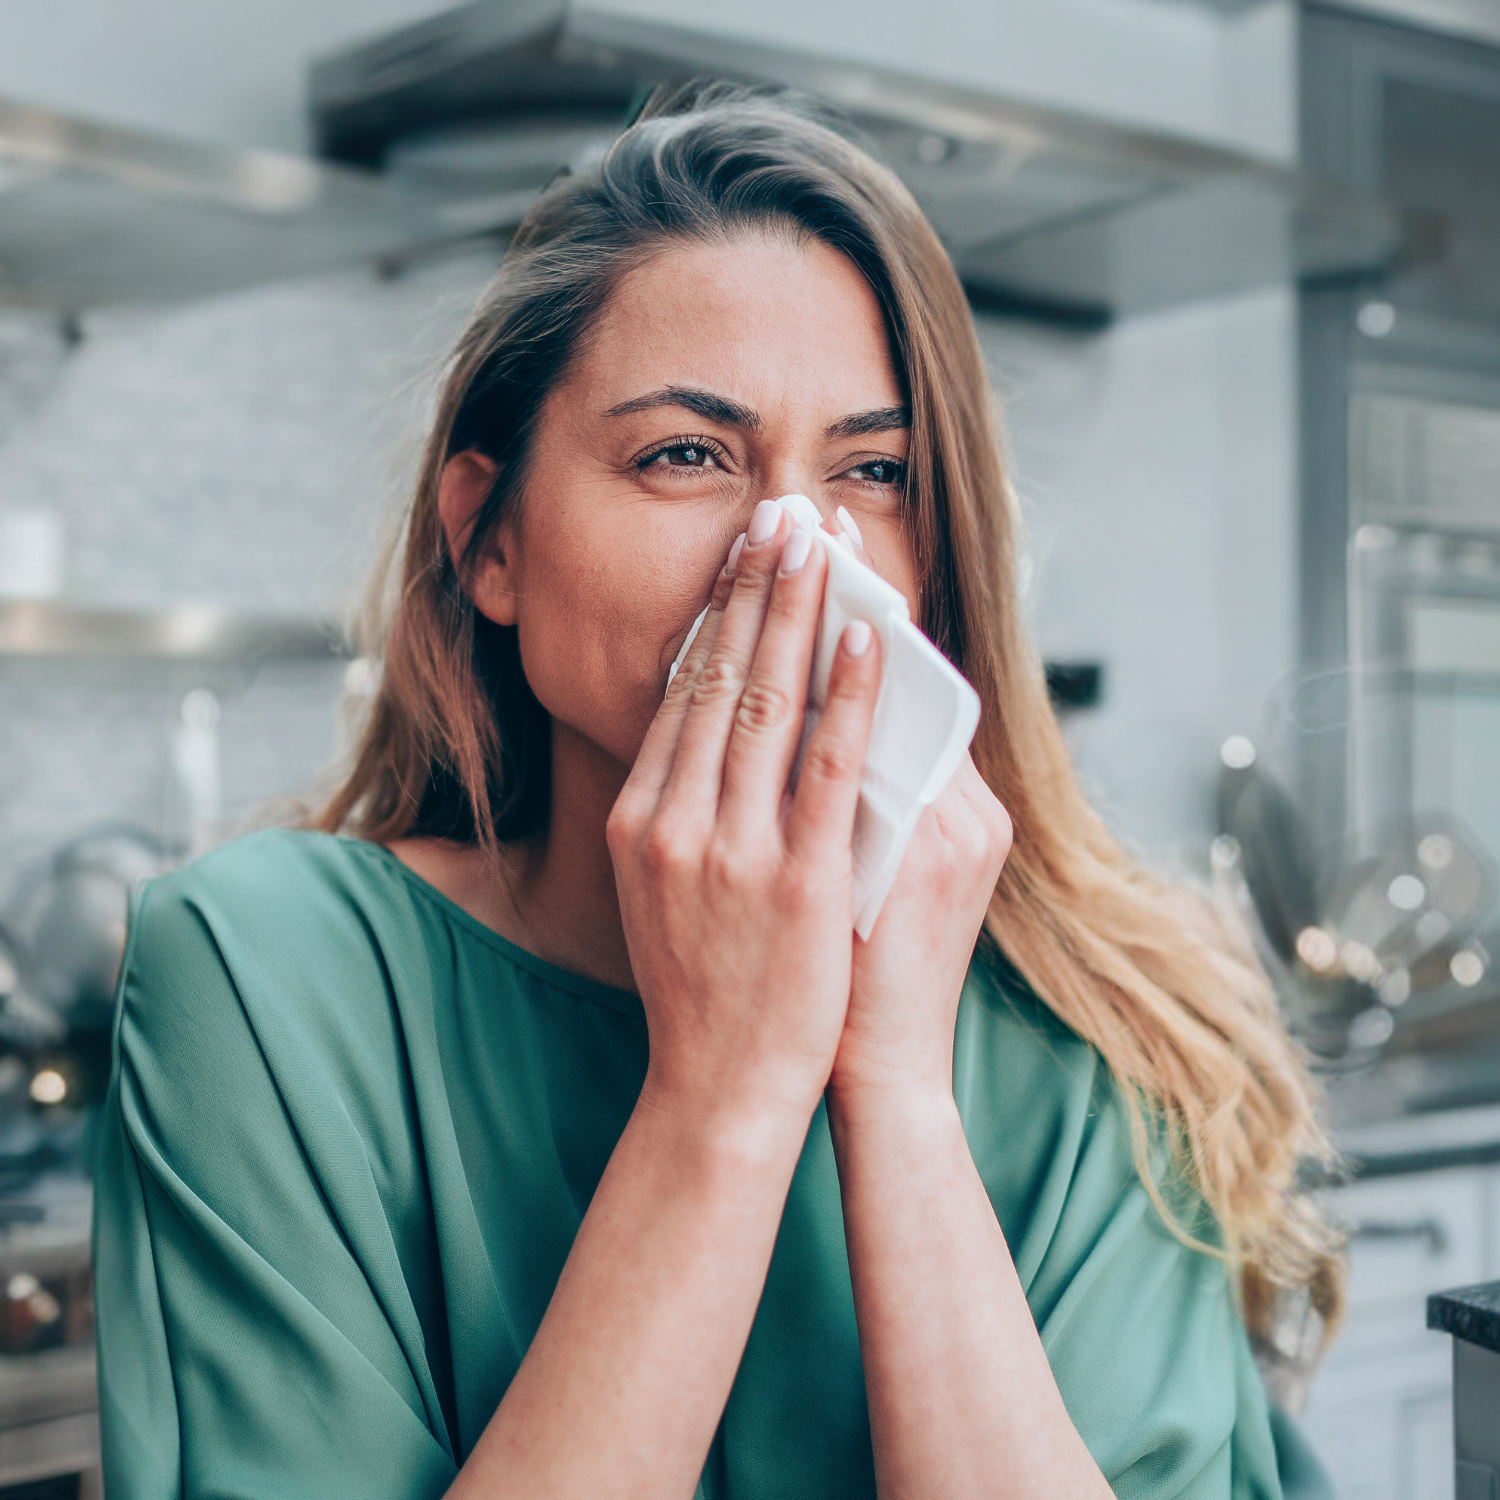 A woman in a green blouse holding a tissue to her nose, dealing with allergy symptoms, with a look of relief or hope, suggesting the potential benefits of natural herbal remedies for allergies.